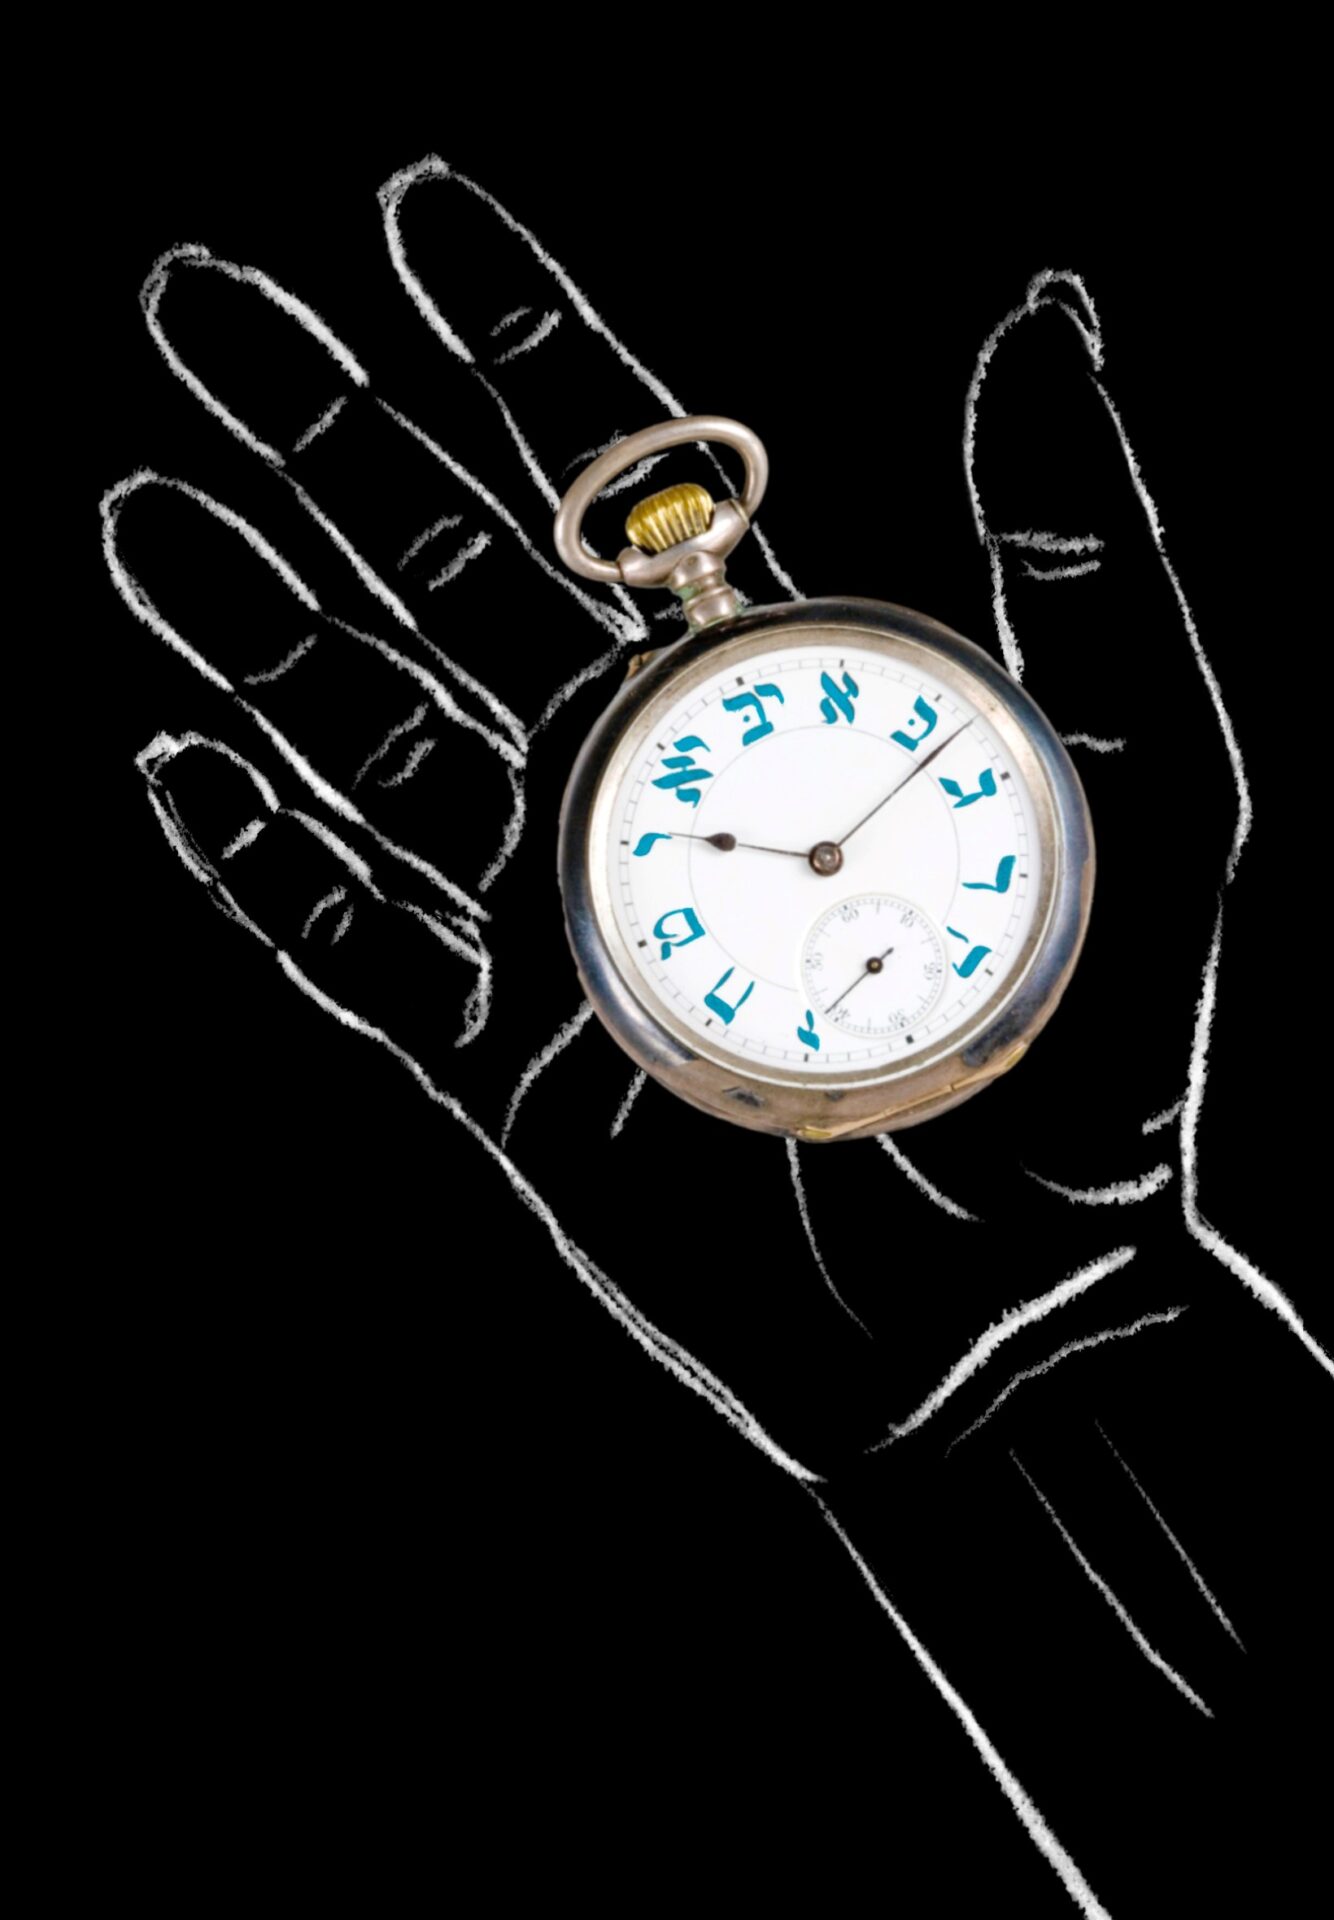 A pocket watch in a hand